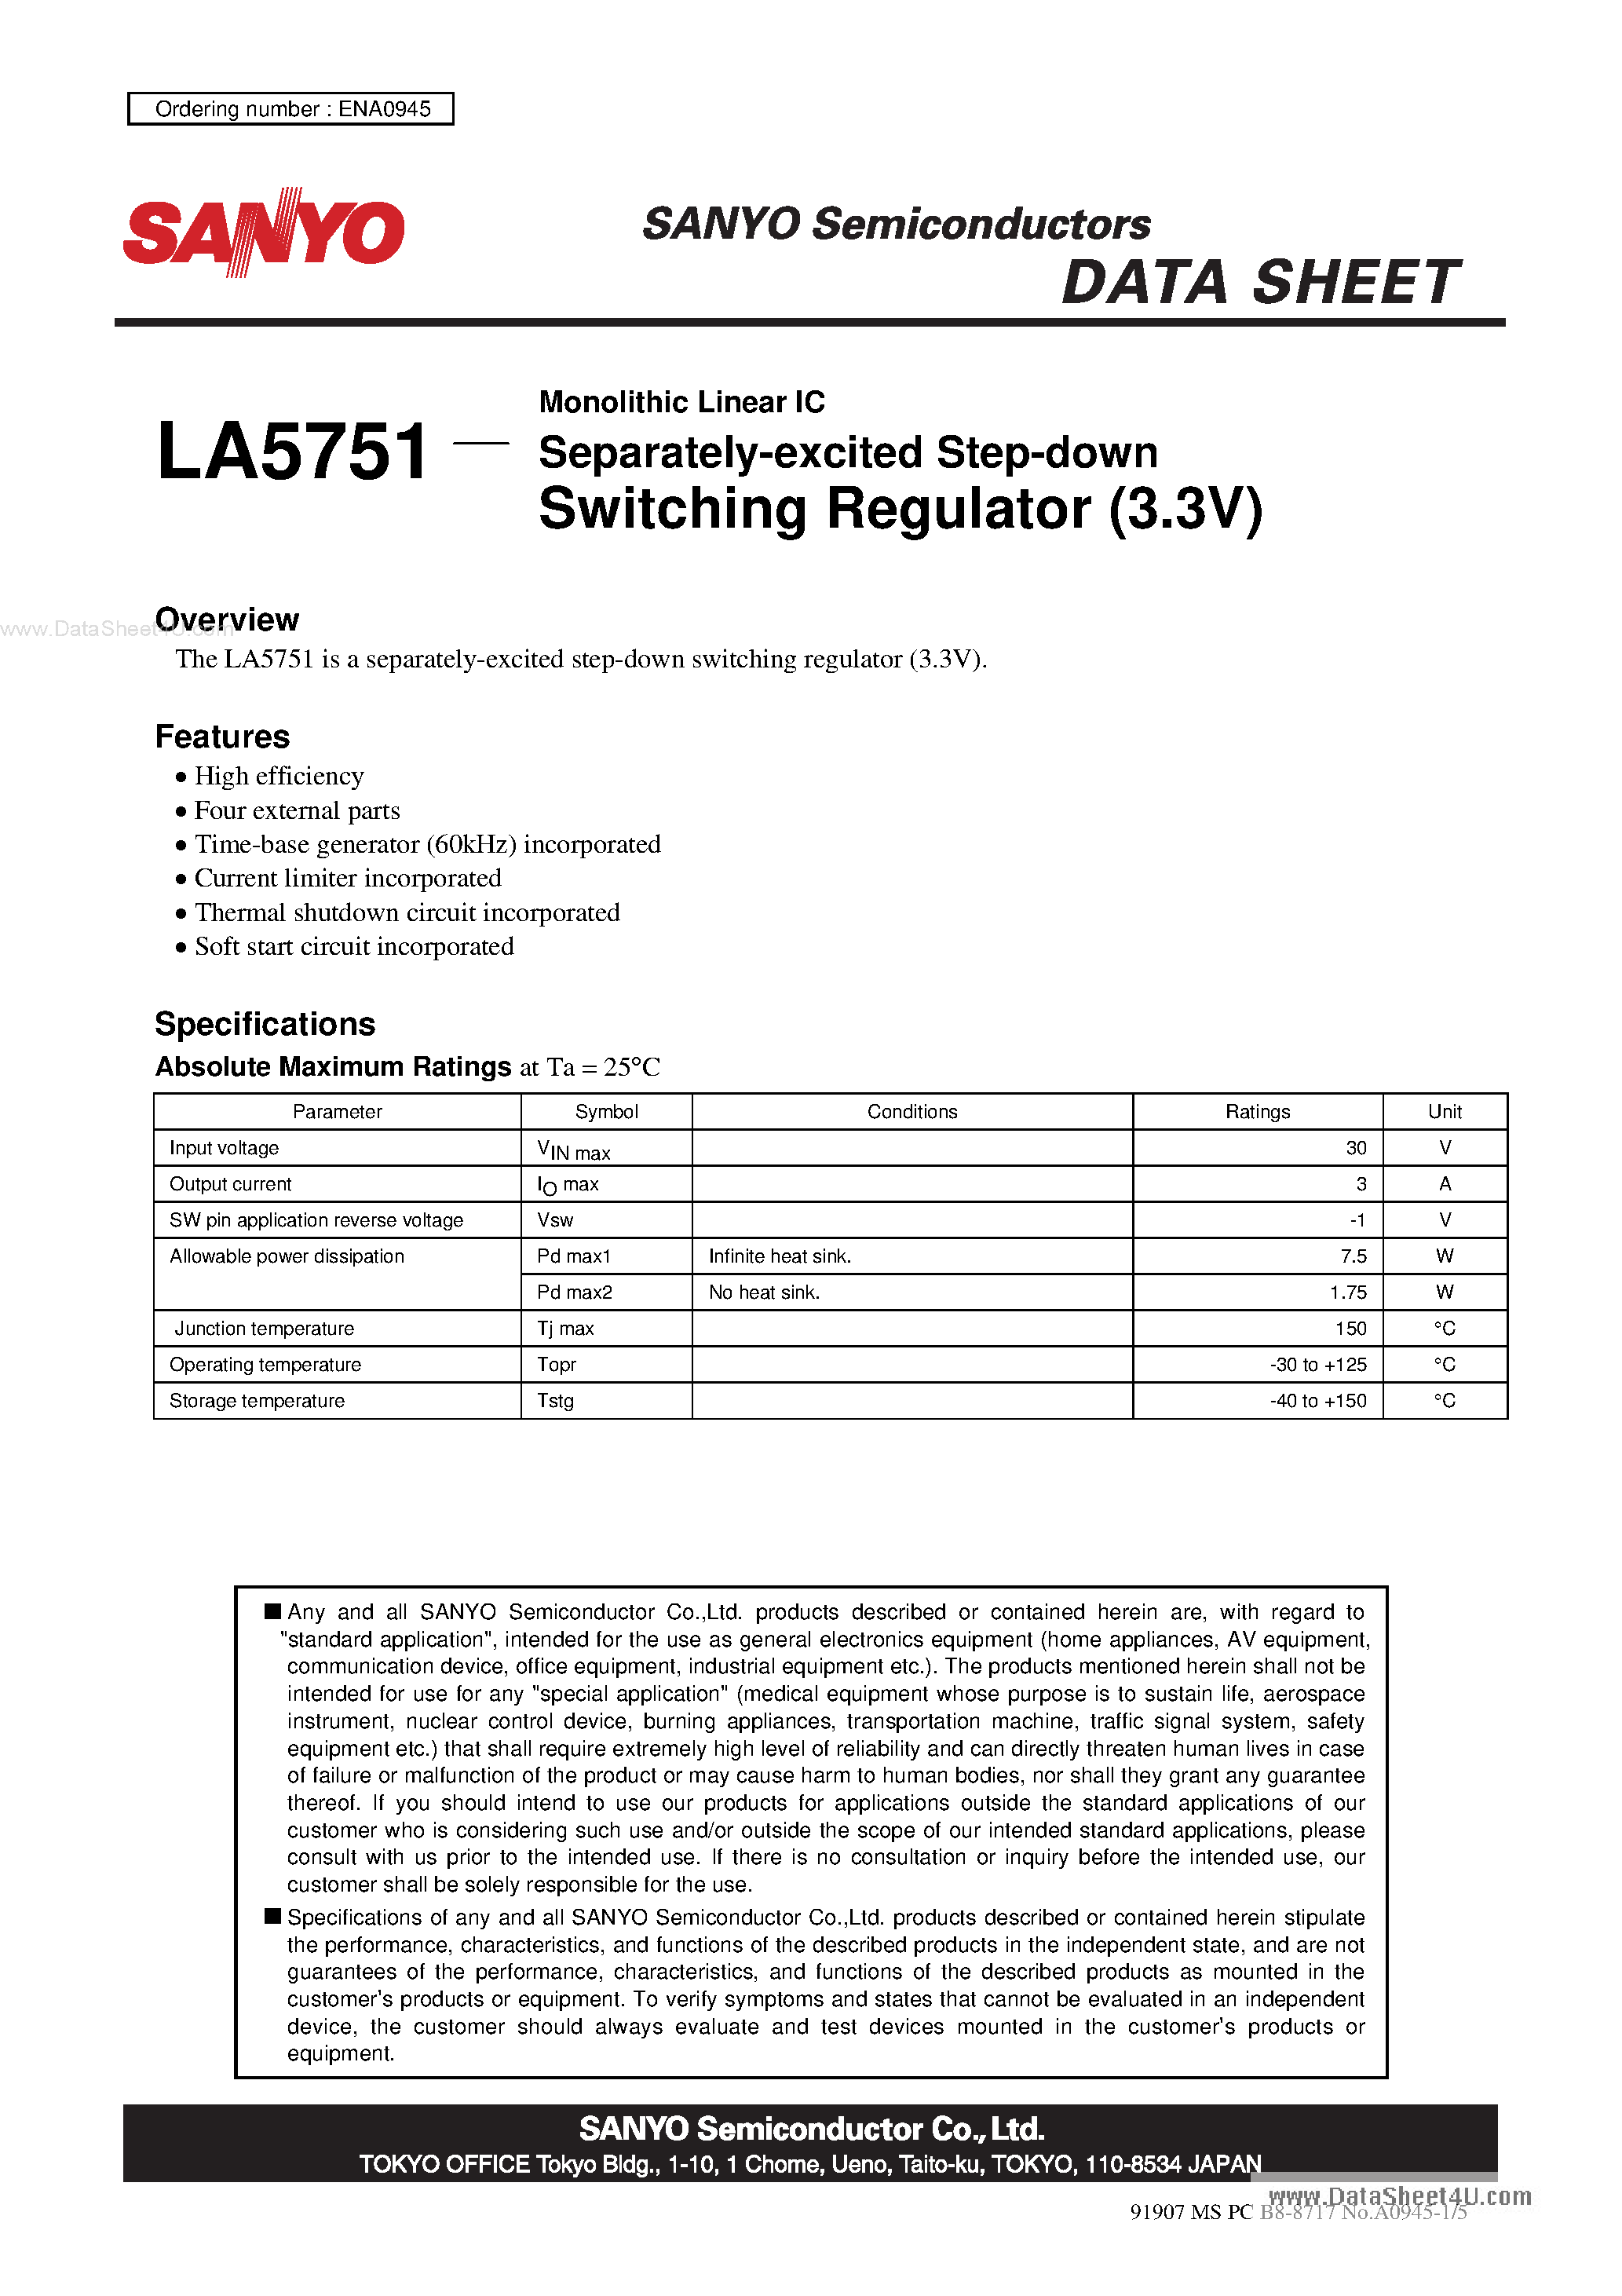 Даташит LA5751 - Monolithic Linear IC Separately-Excited Step-Down Switching Regulator страница 1